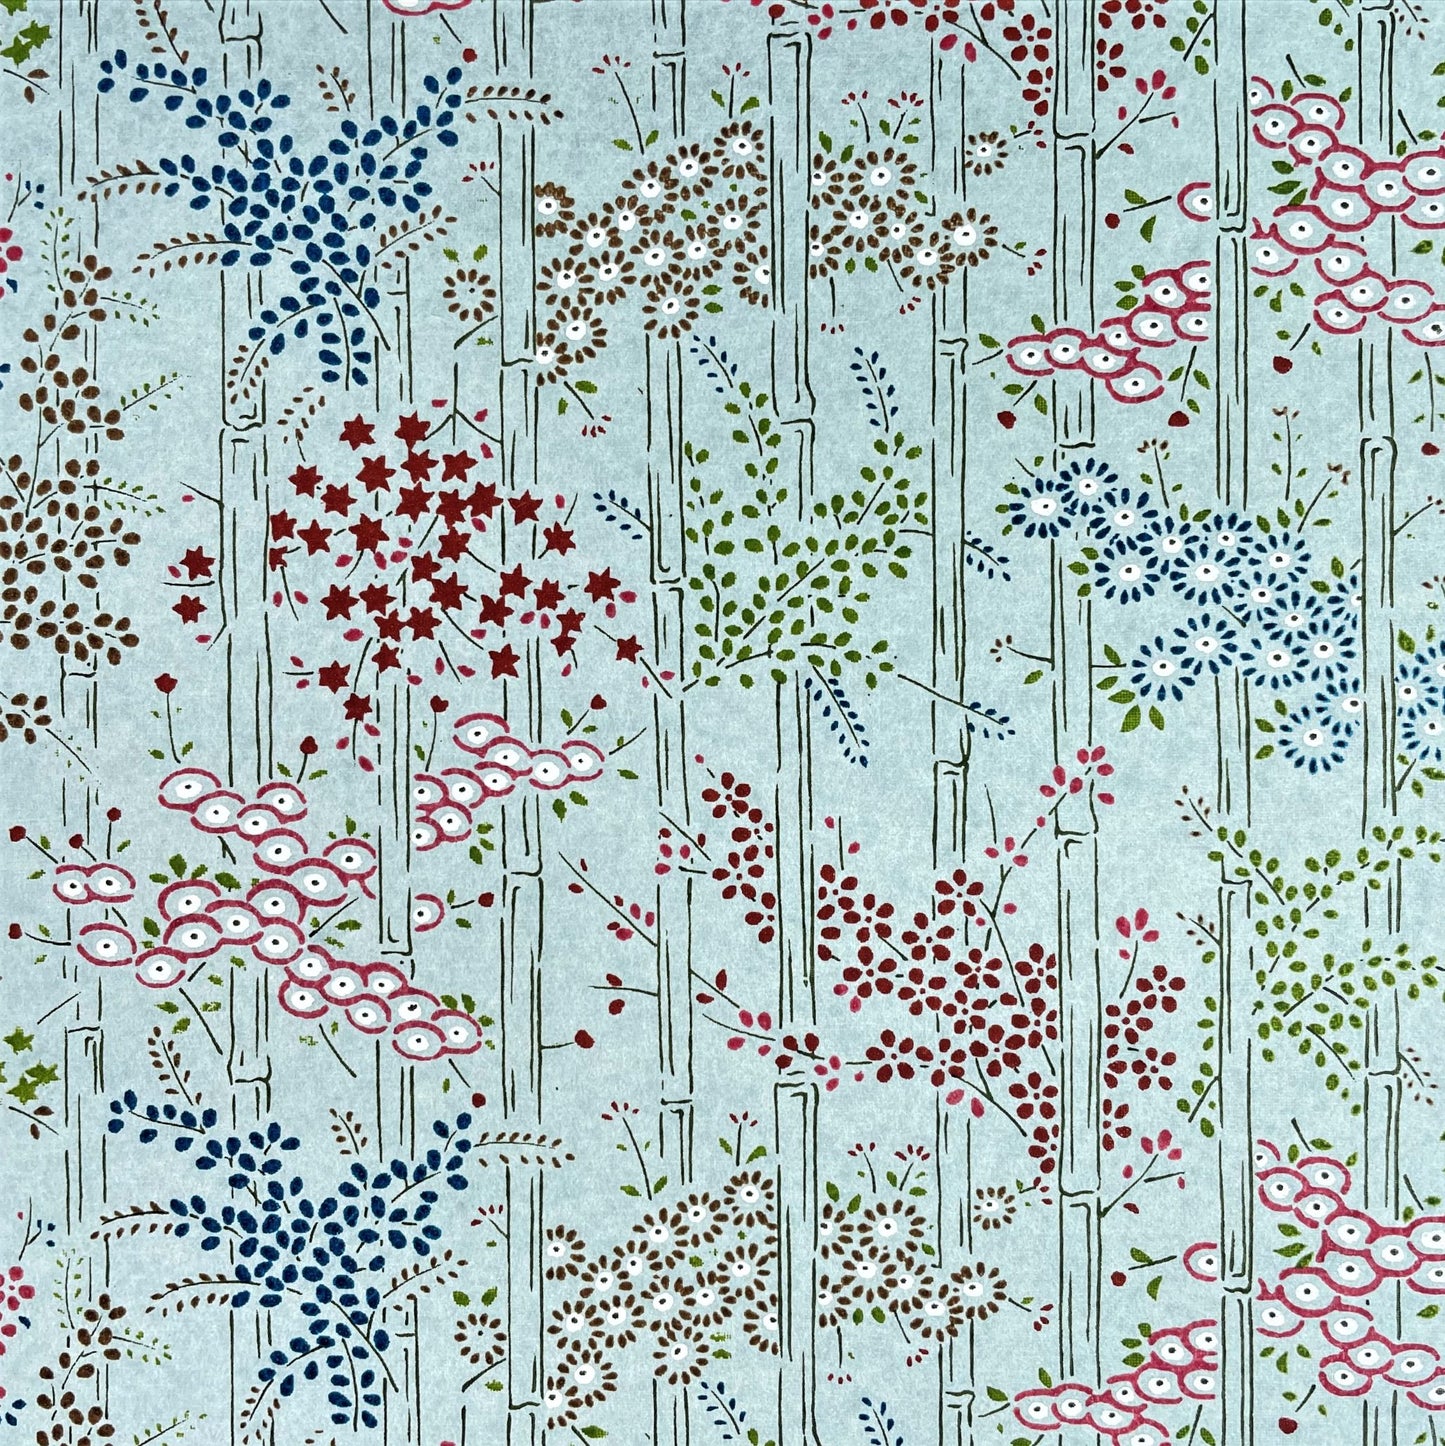 japanese silk-screen handmade paper showing pattern of bamboo, flowers and foliage on light teal backdrop